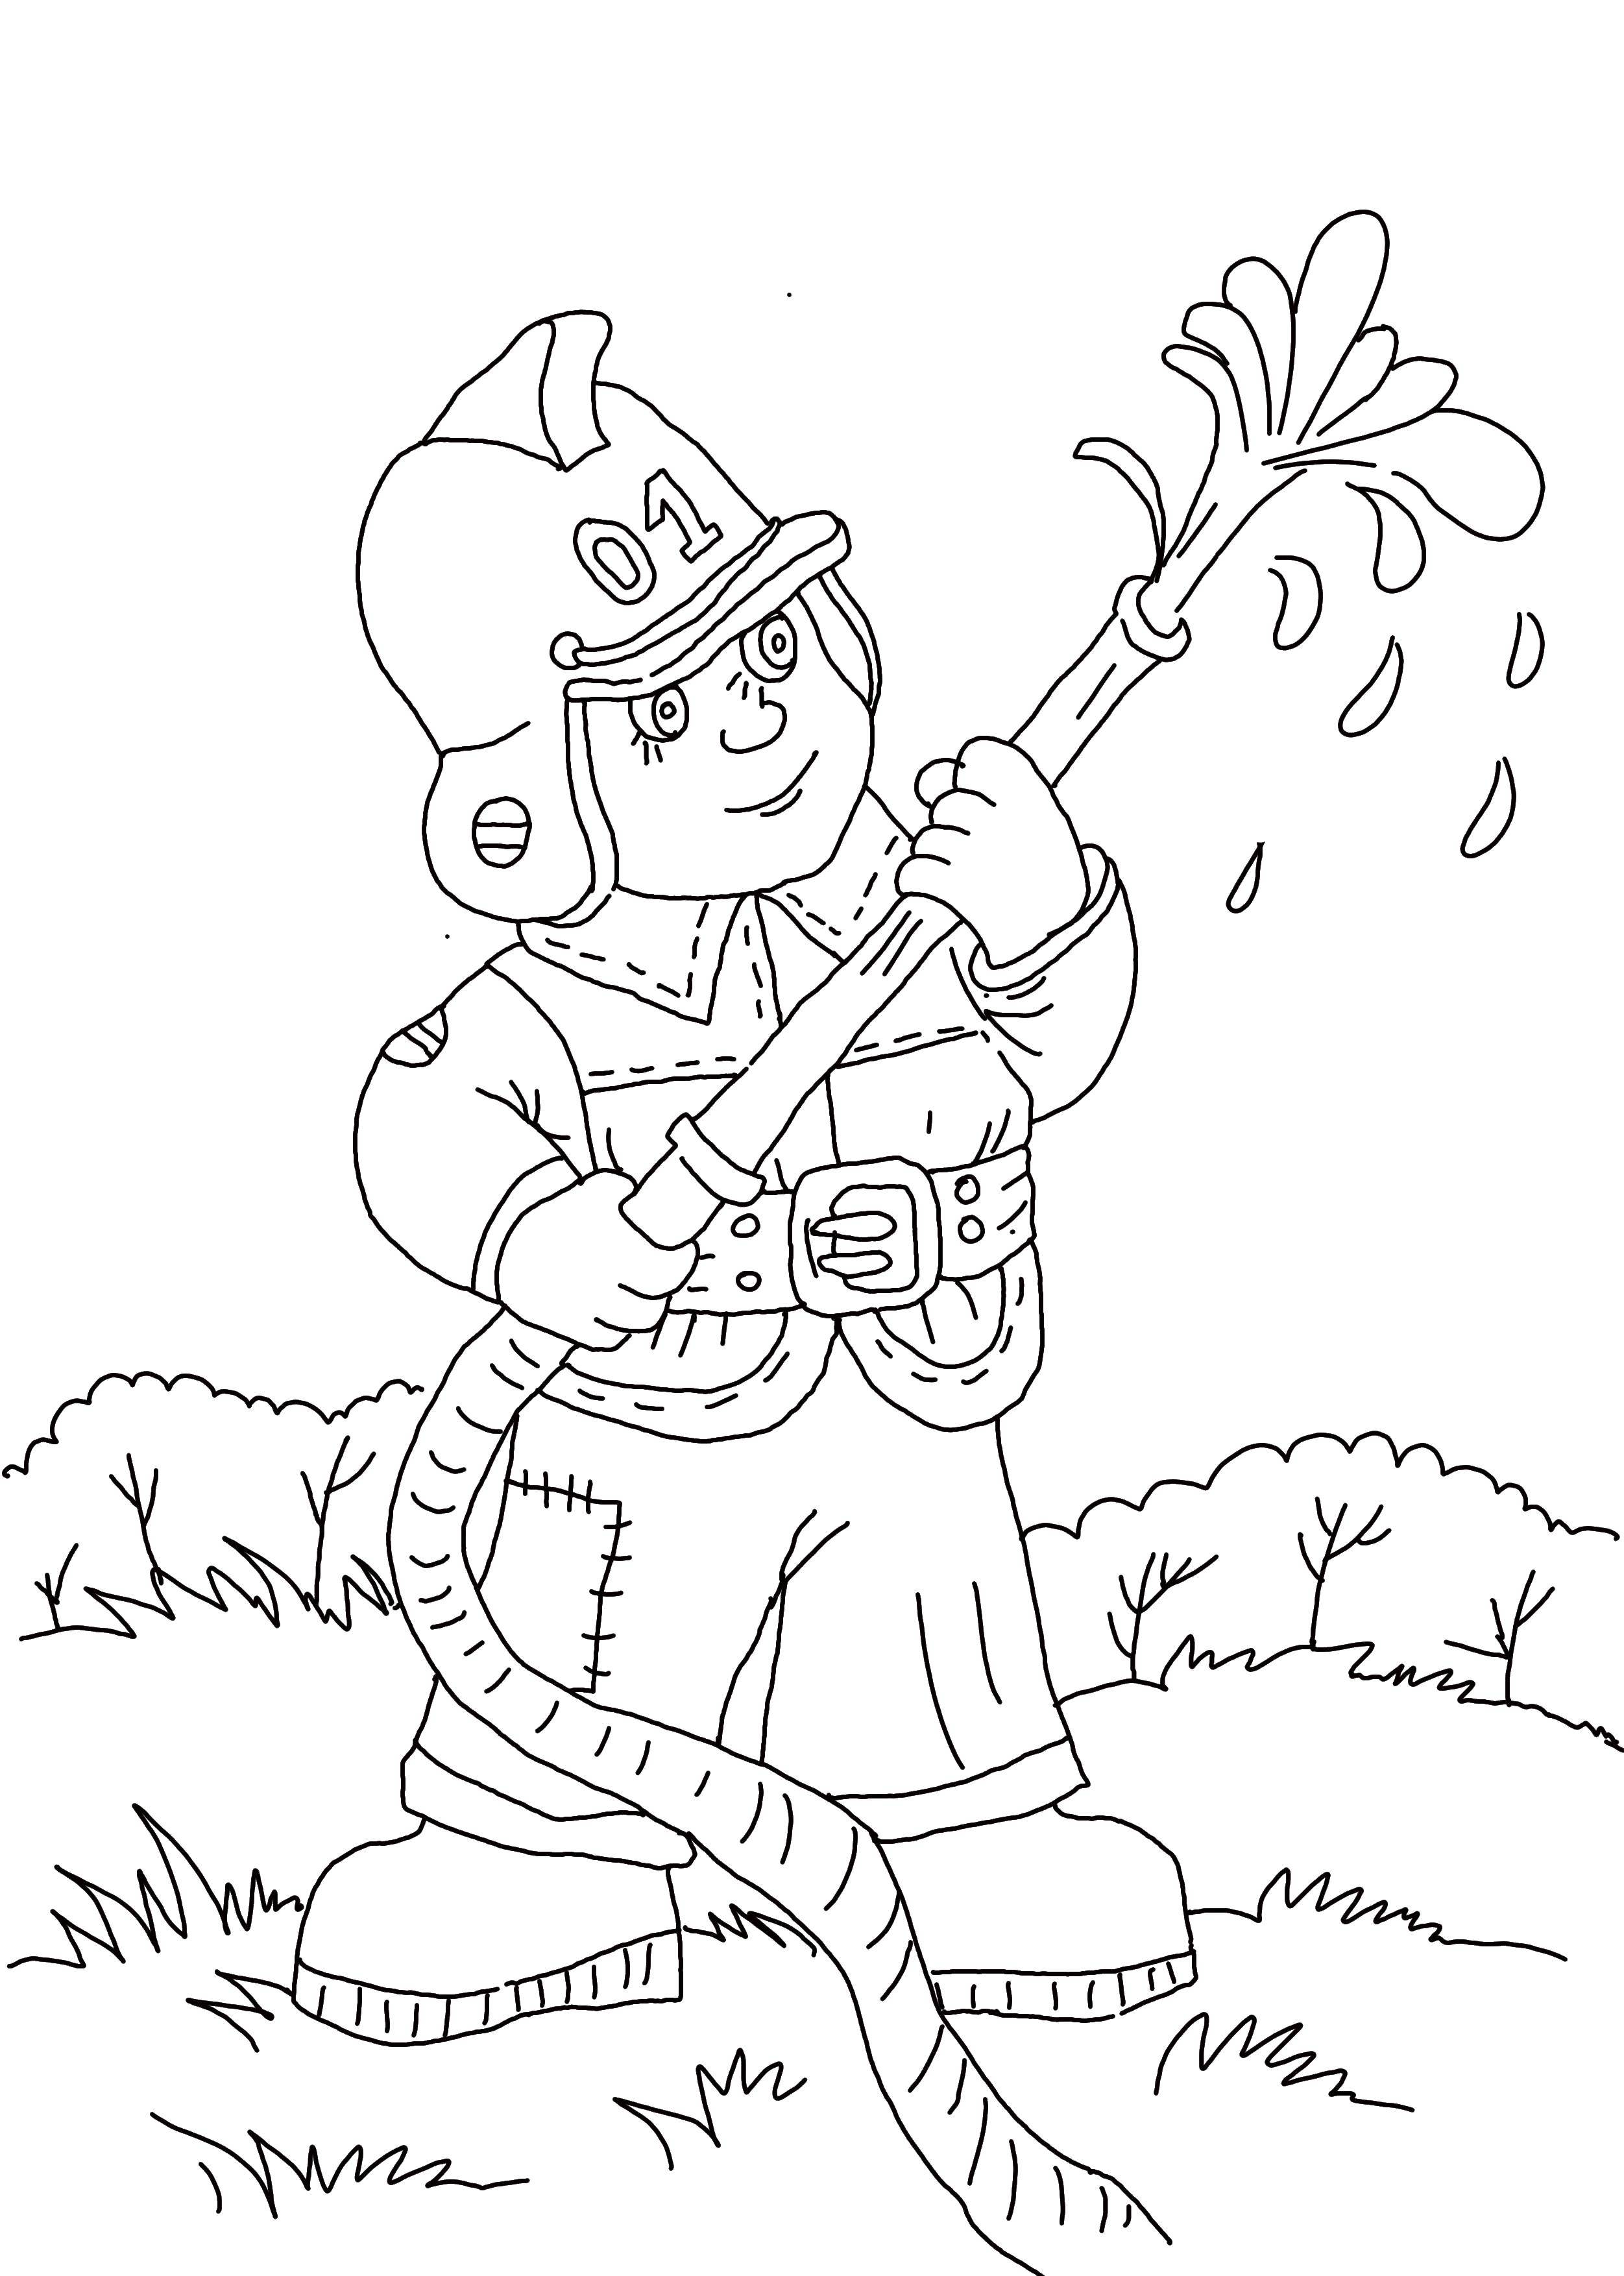 Coloring Firefighter with hose. Category the fire. Tags:  fire, police, ambulance.